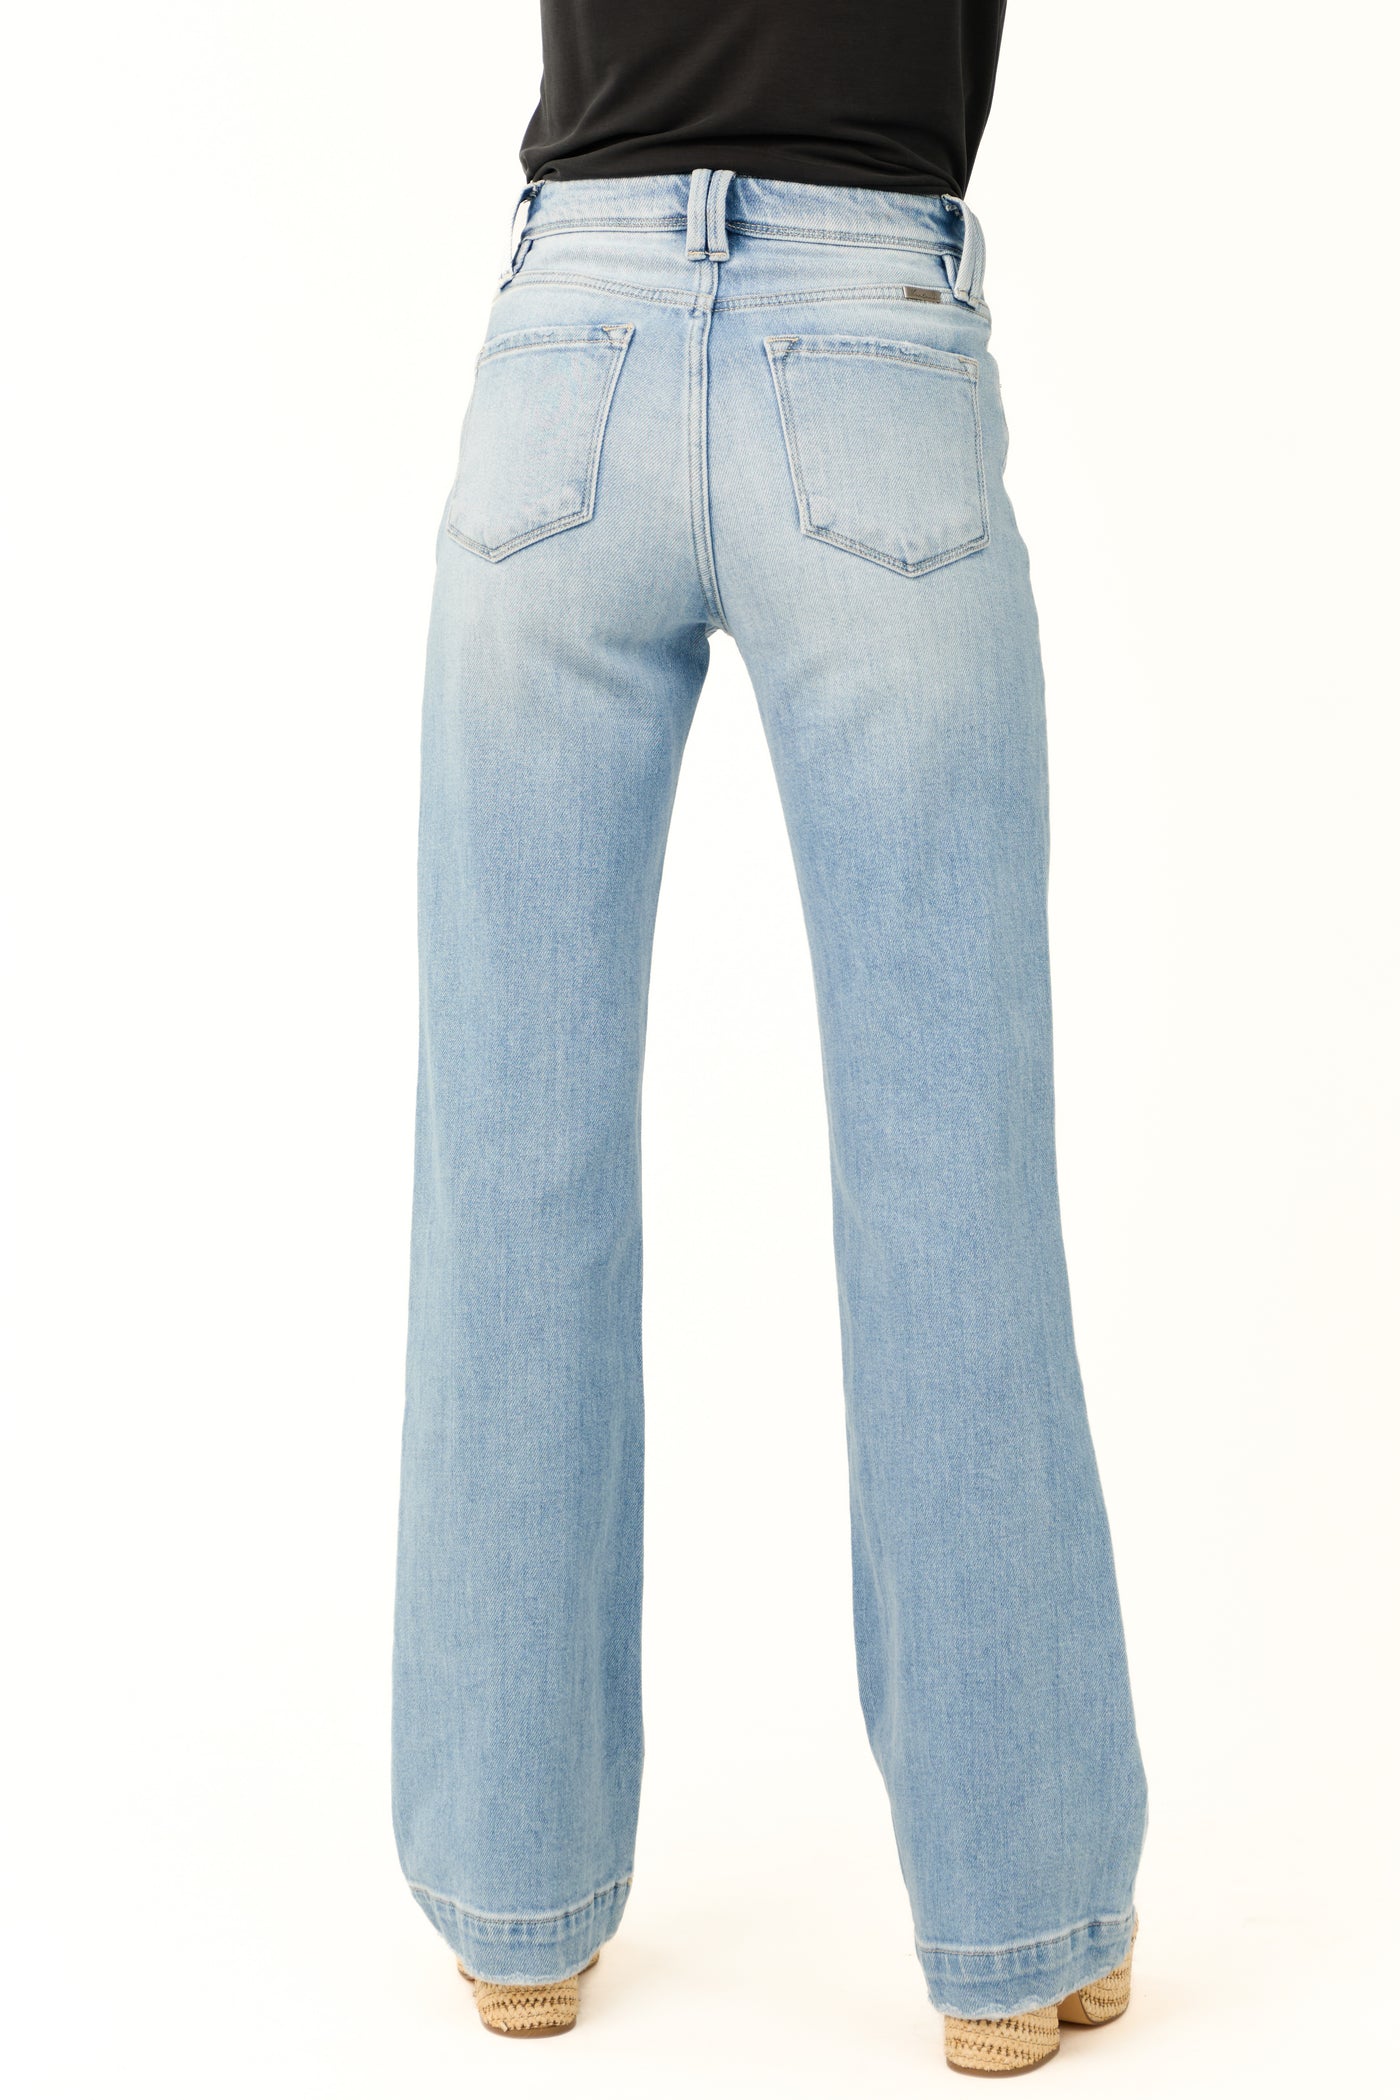 KanCan Light Wash High Rise Wide Relaxed Denim Jeans